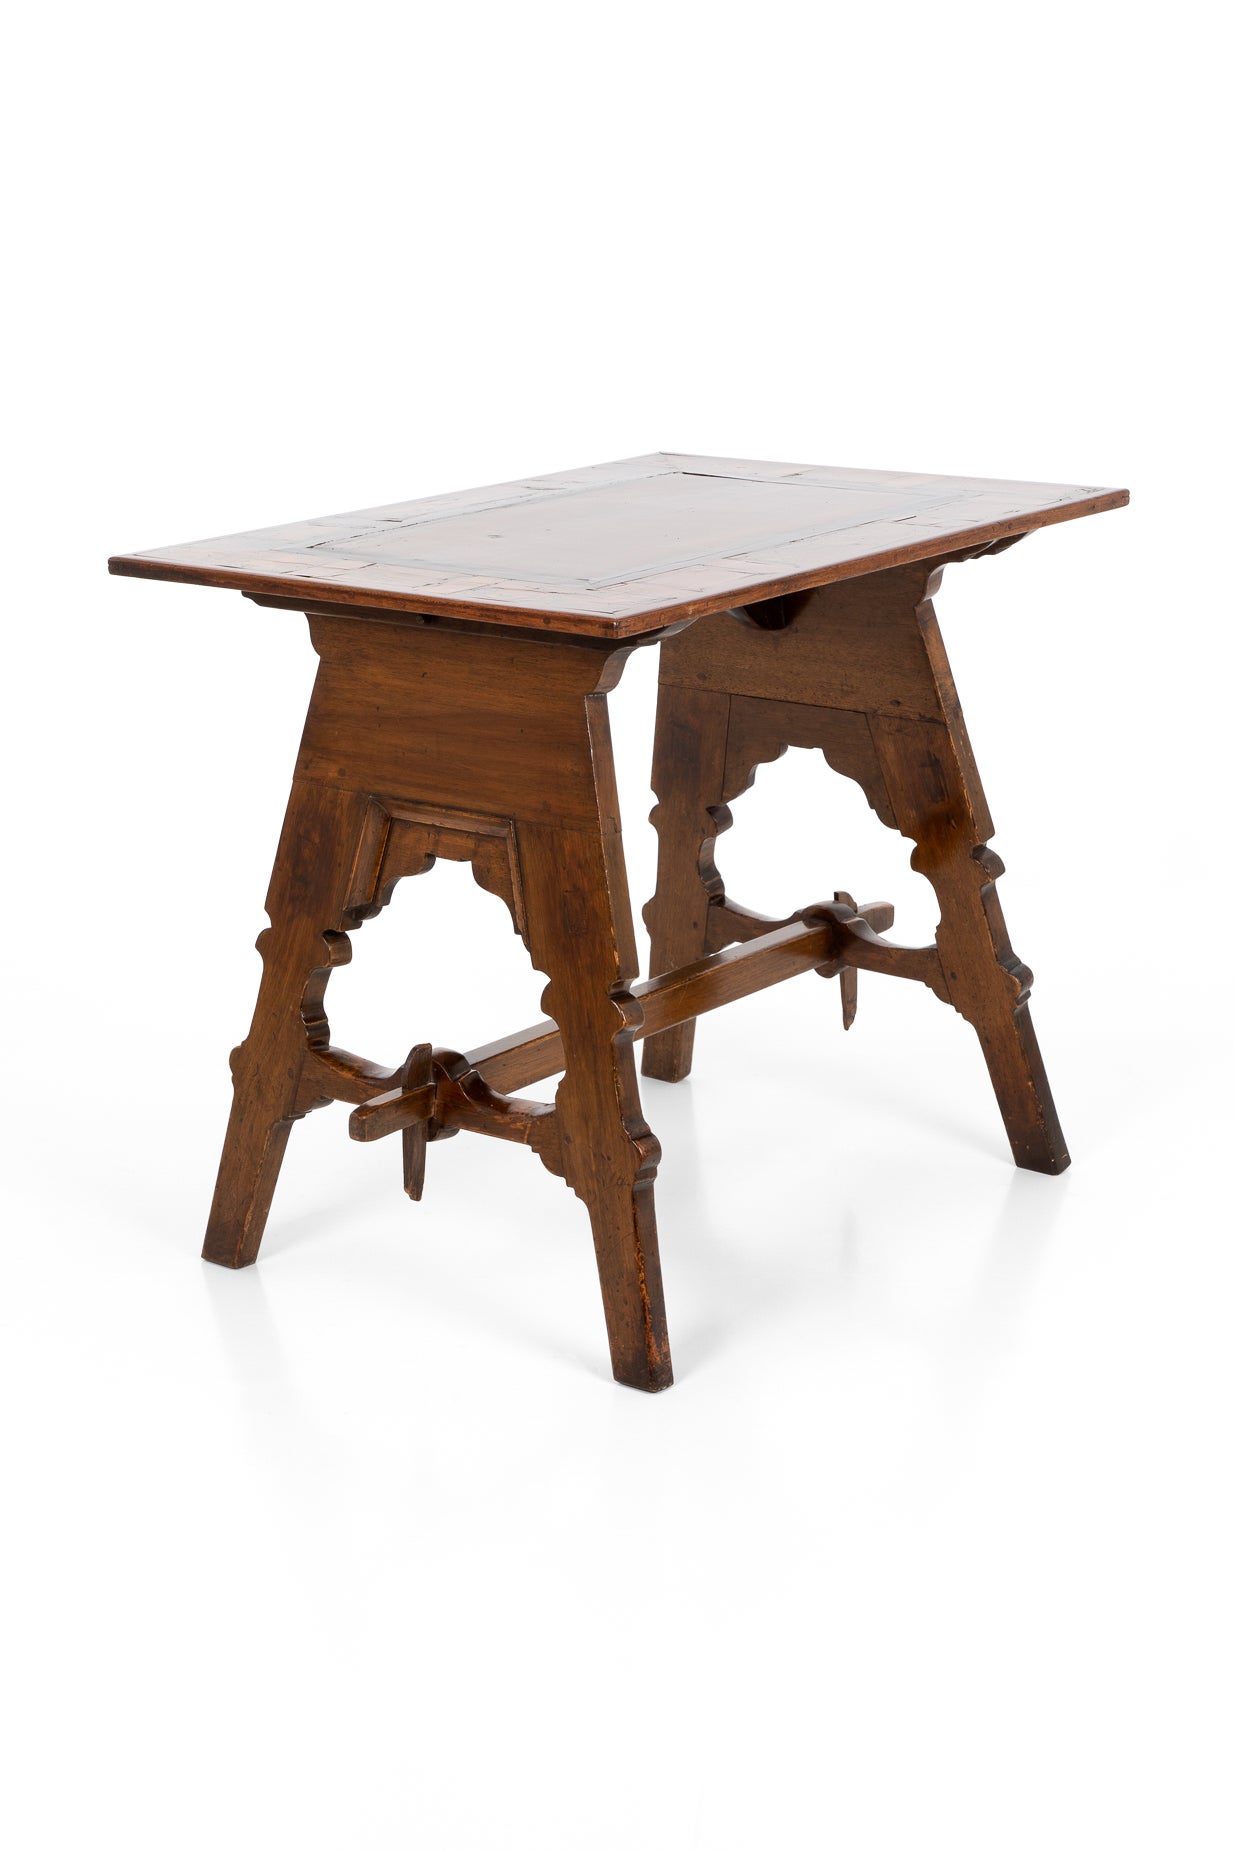 Spanish Olive Wood Table with Rectangular Top, circa 1900 For Sale